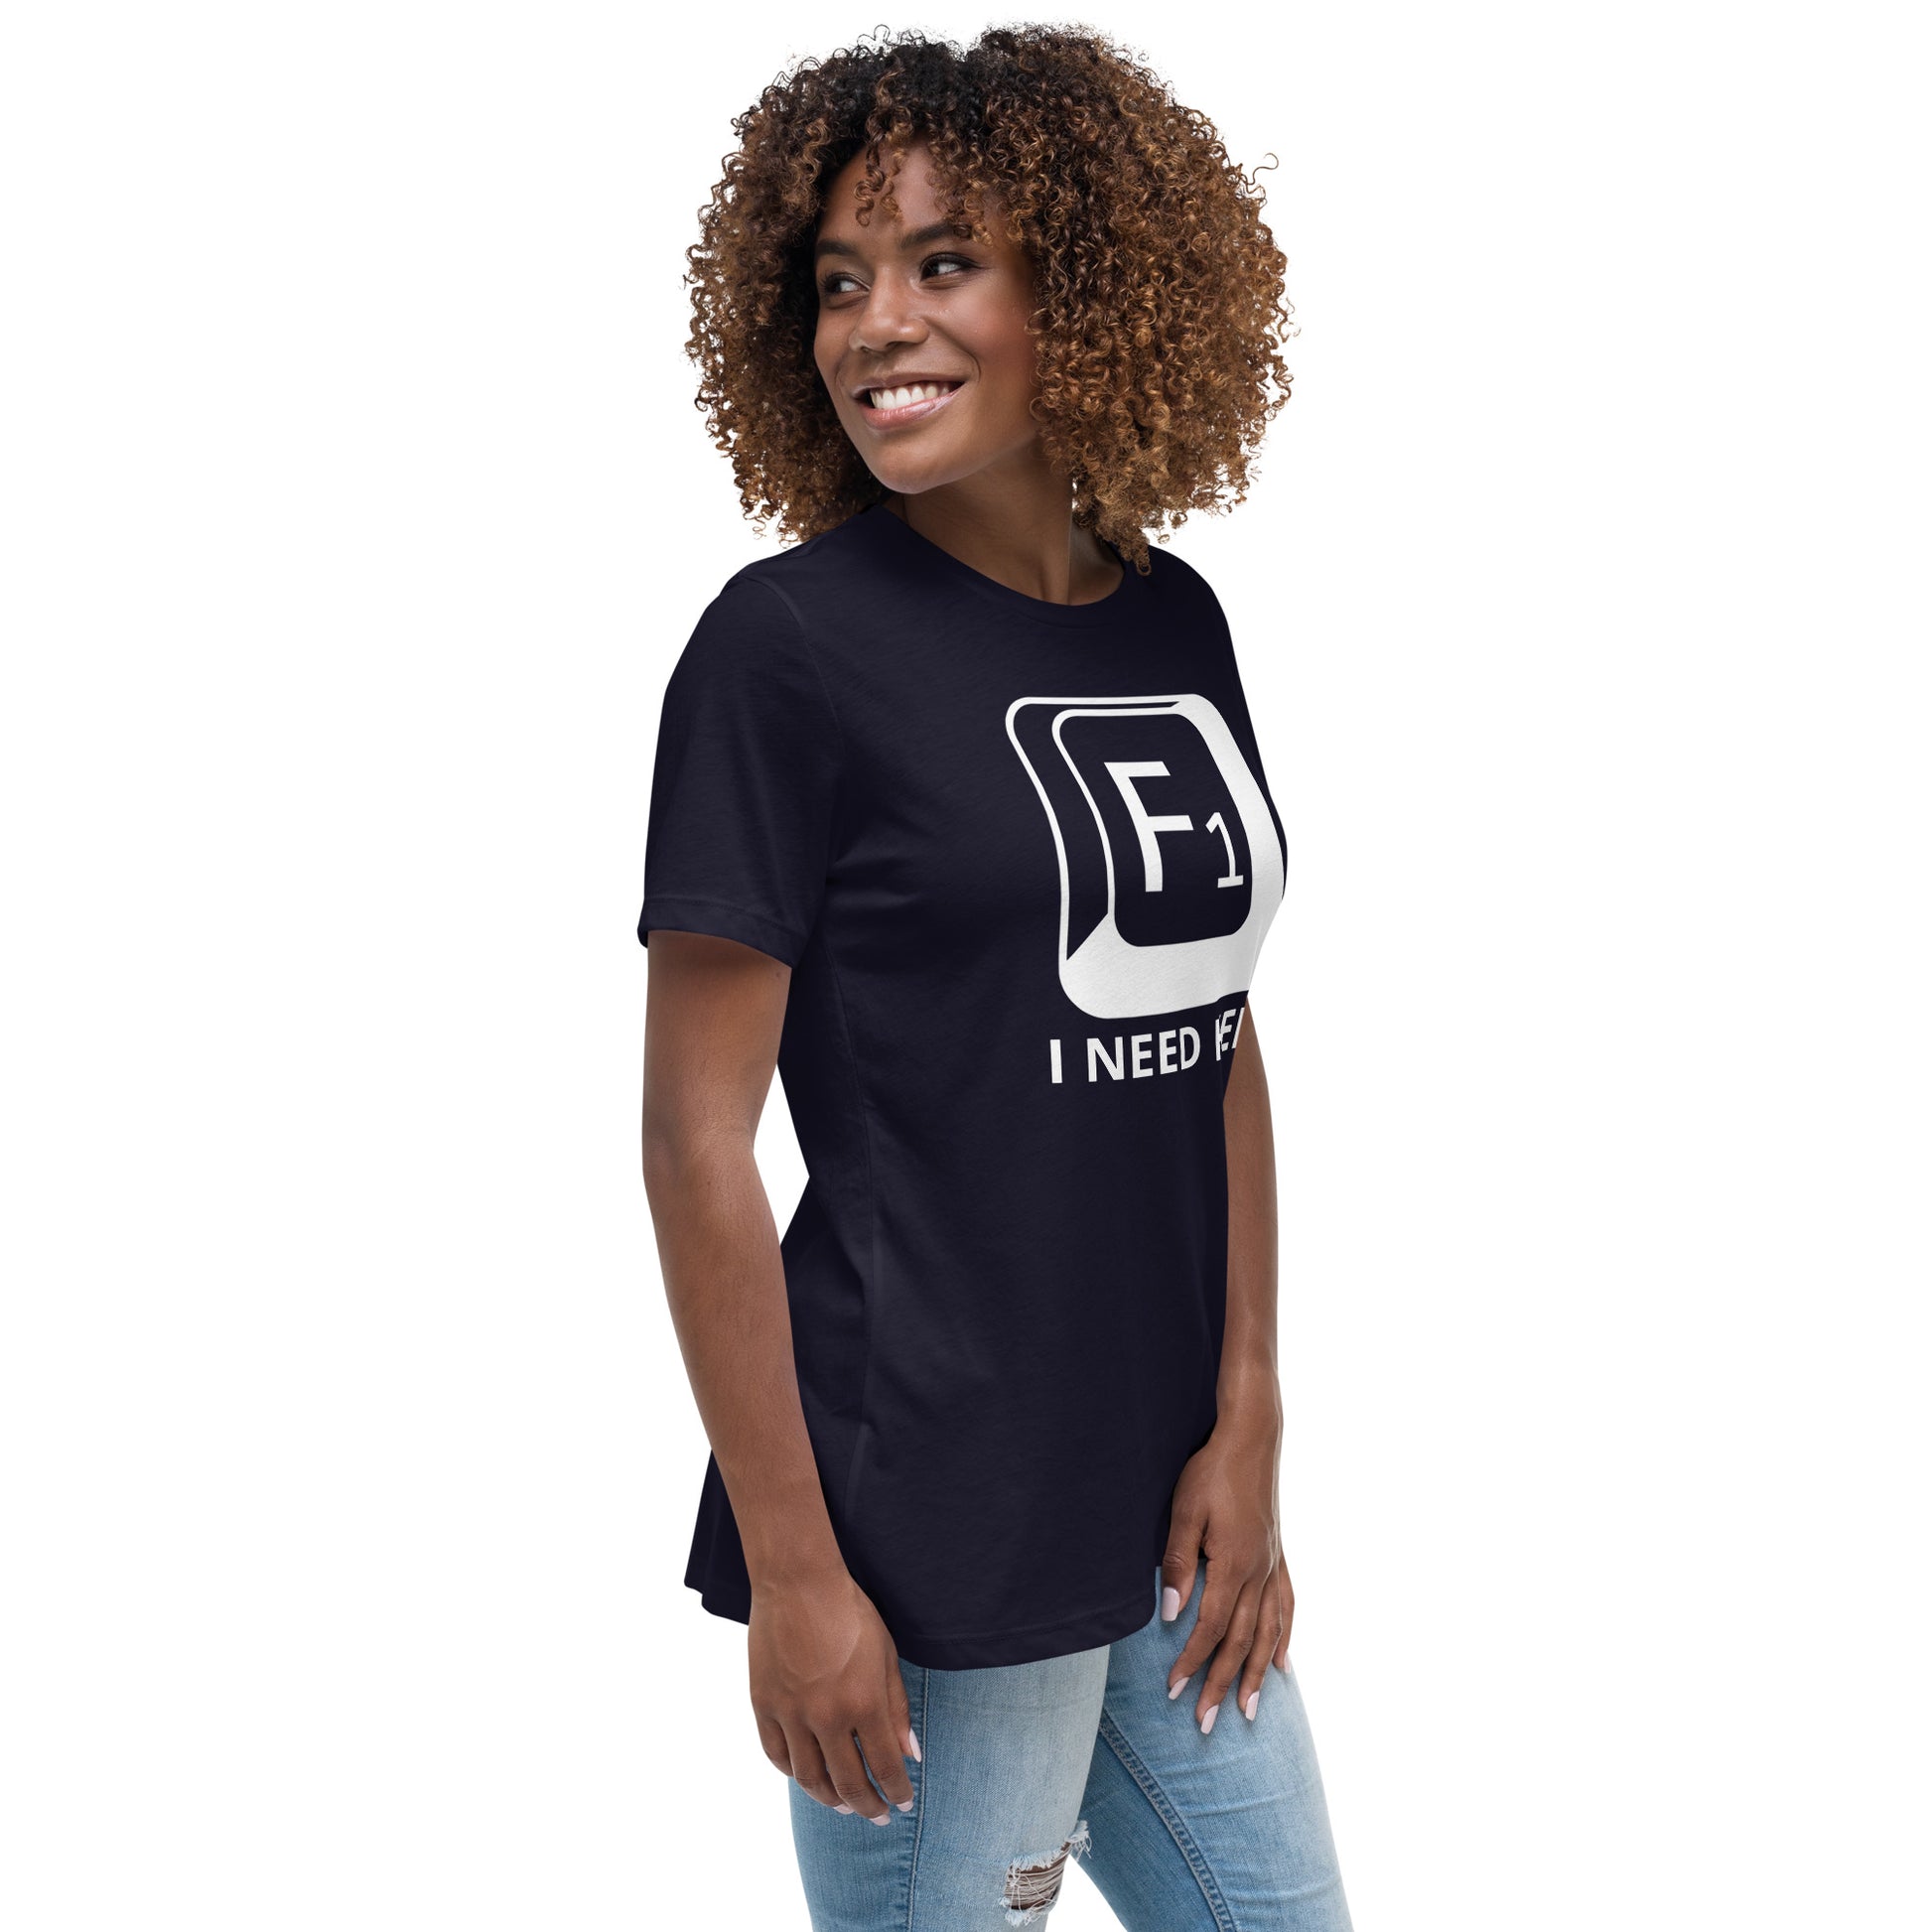 Woman with navy blue t-shirt with picture of "F1" key and text "I need help"